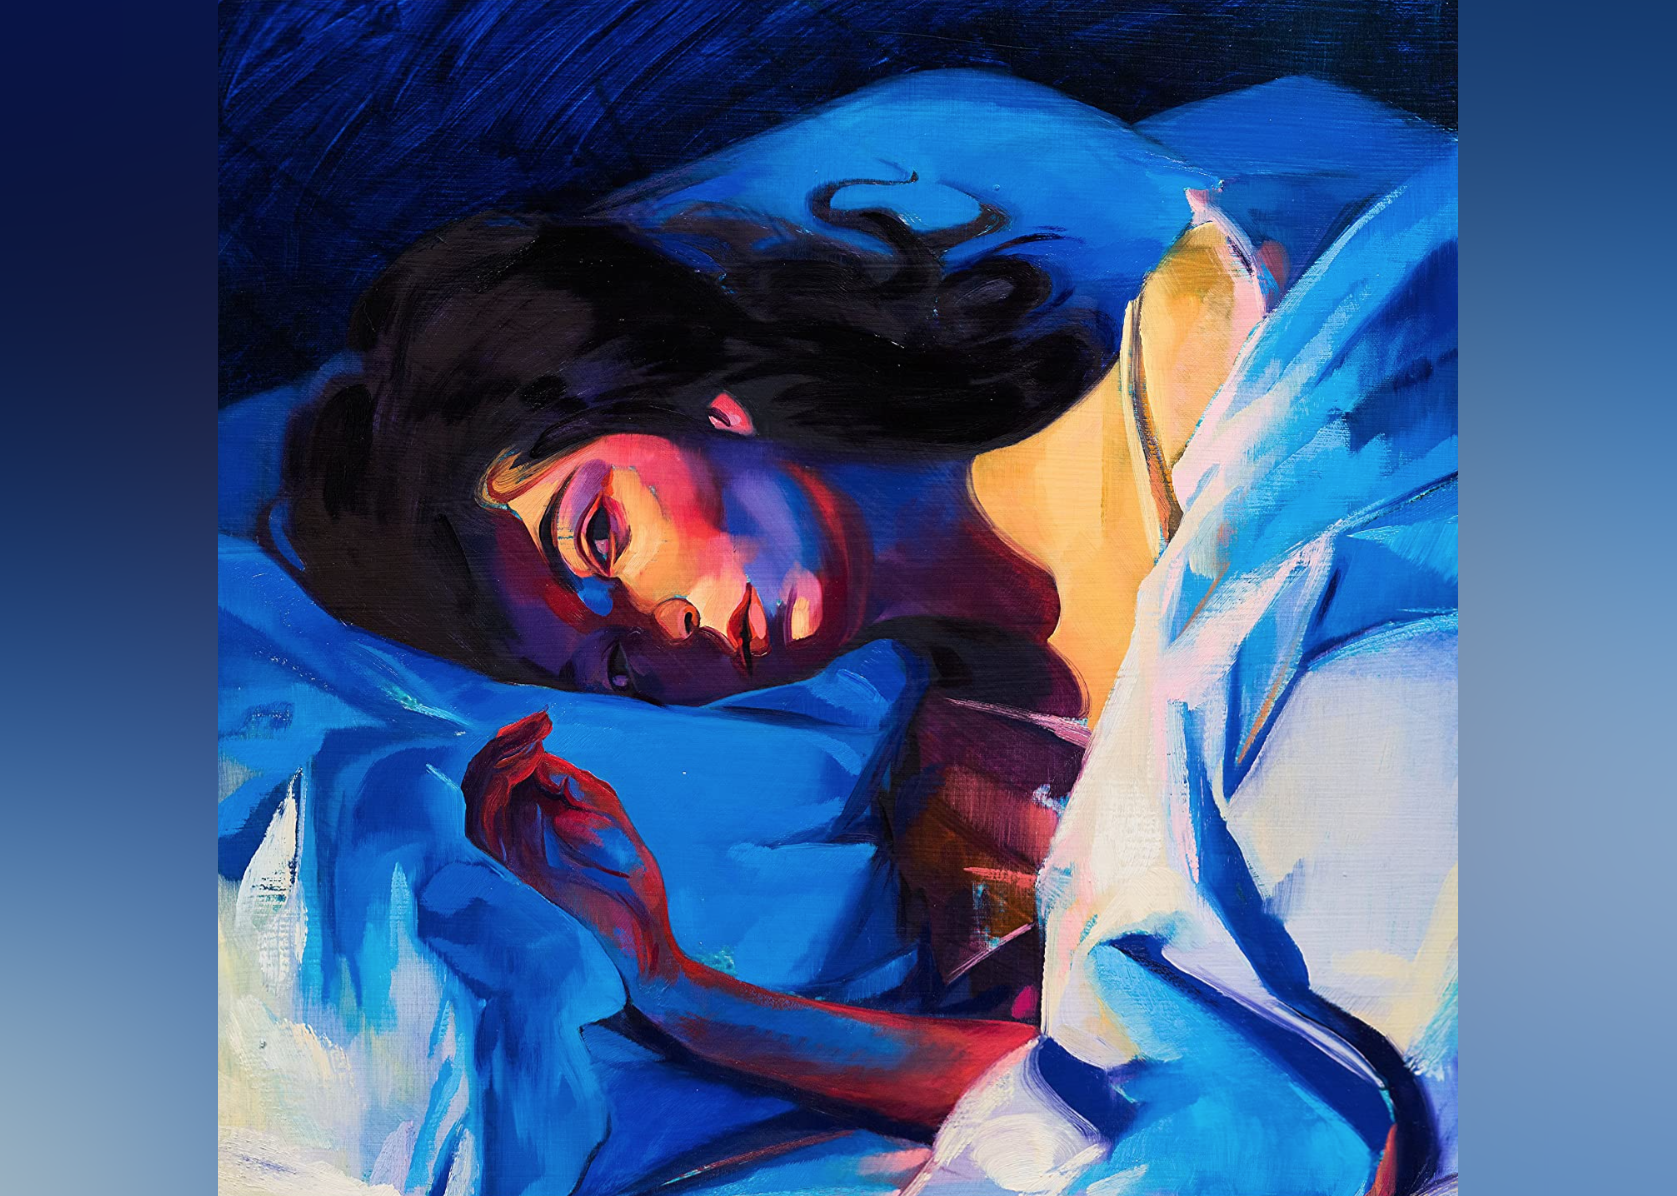 A painting of a young woman in bed with blue shadows.